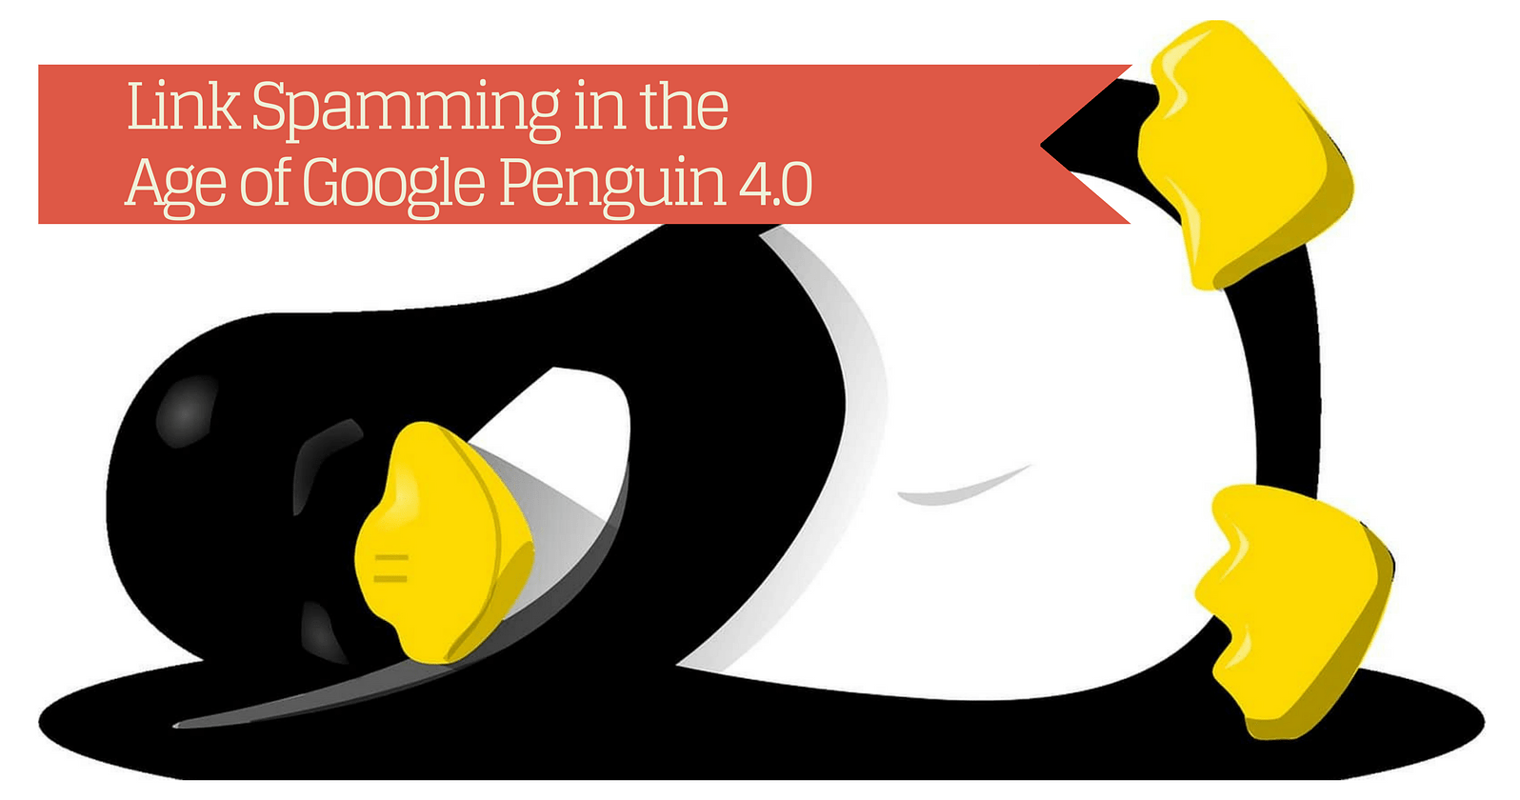 Link Spamming in the Age of Google Penguin 4.0